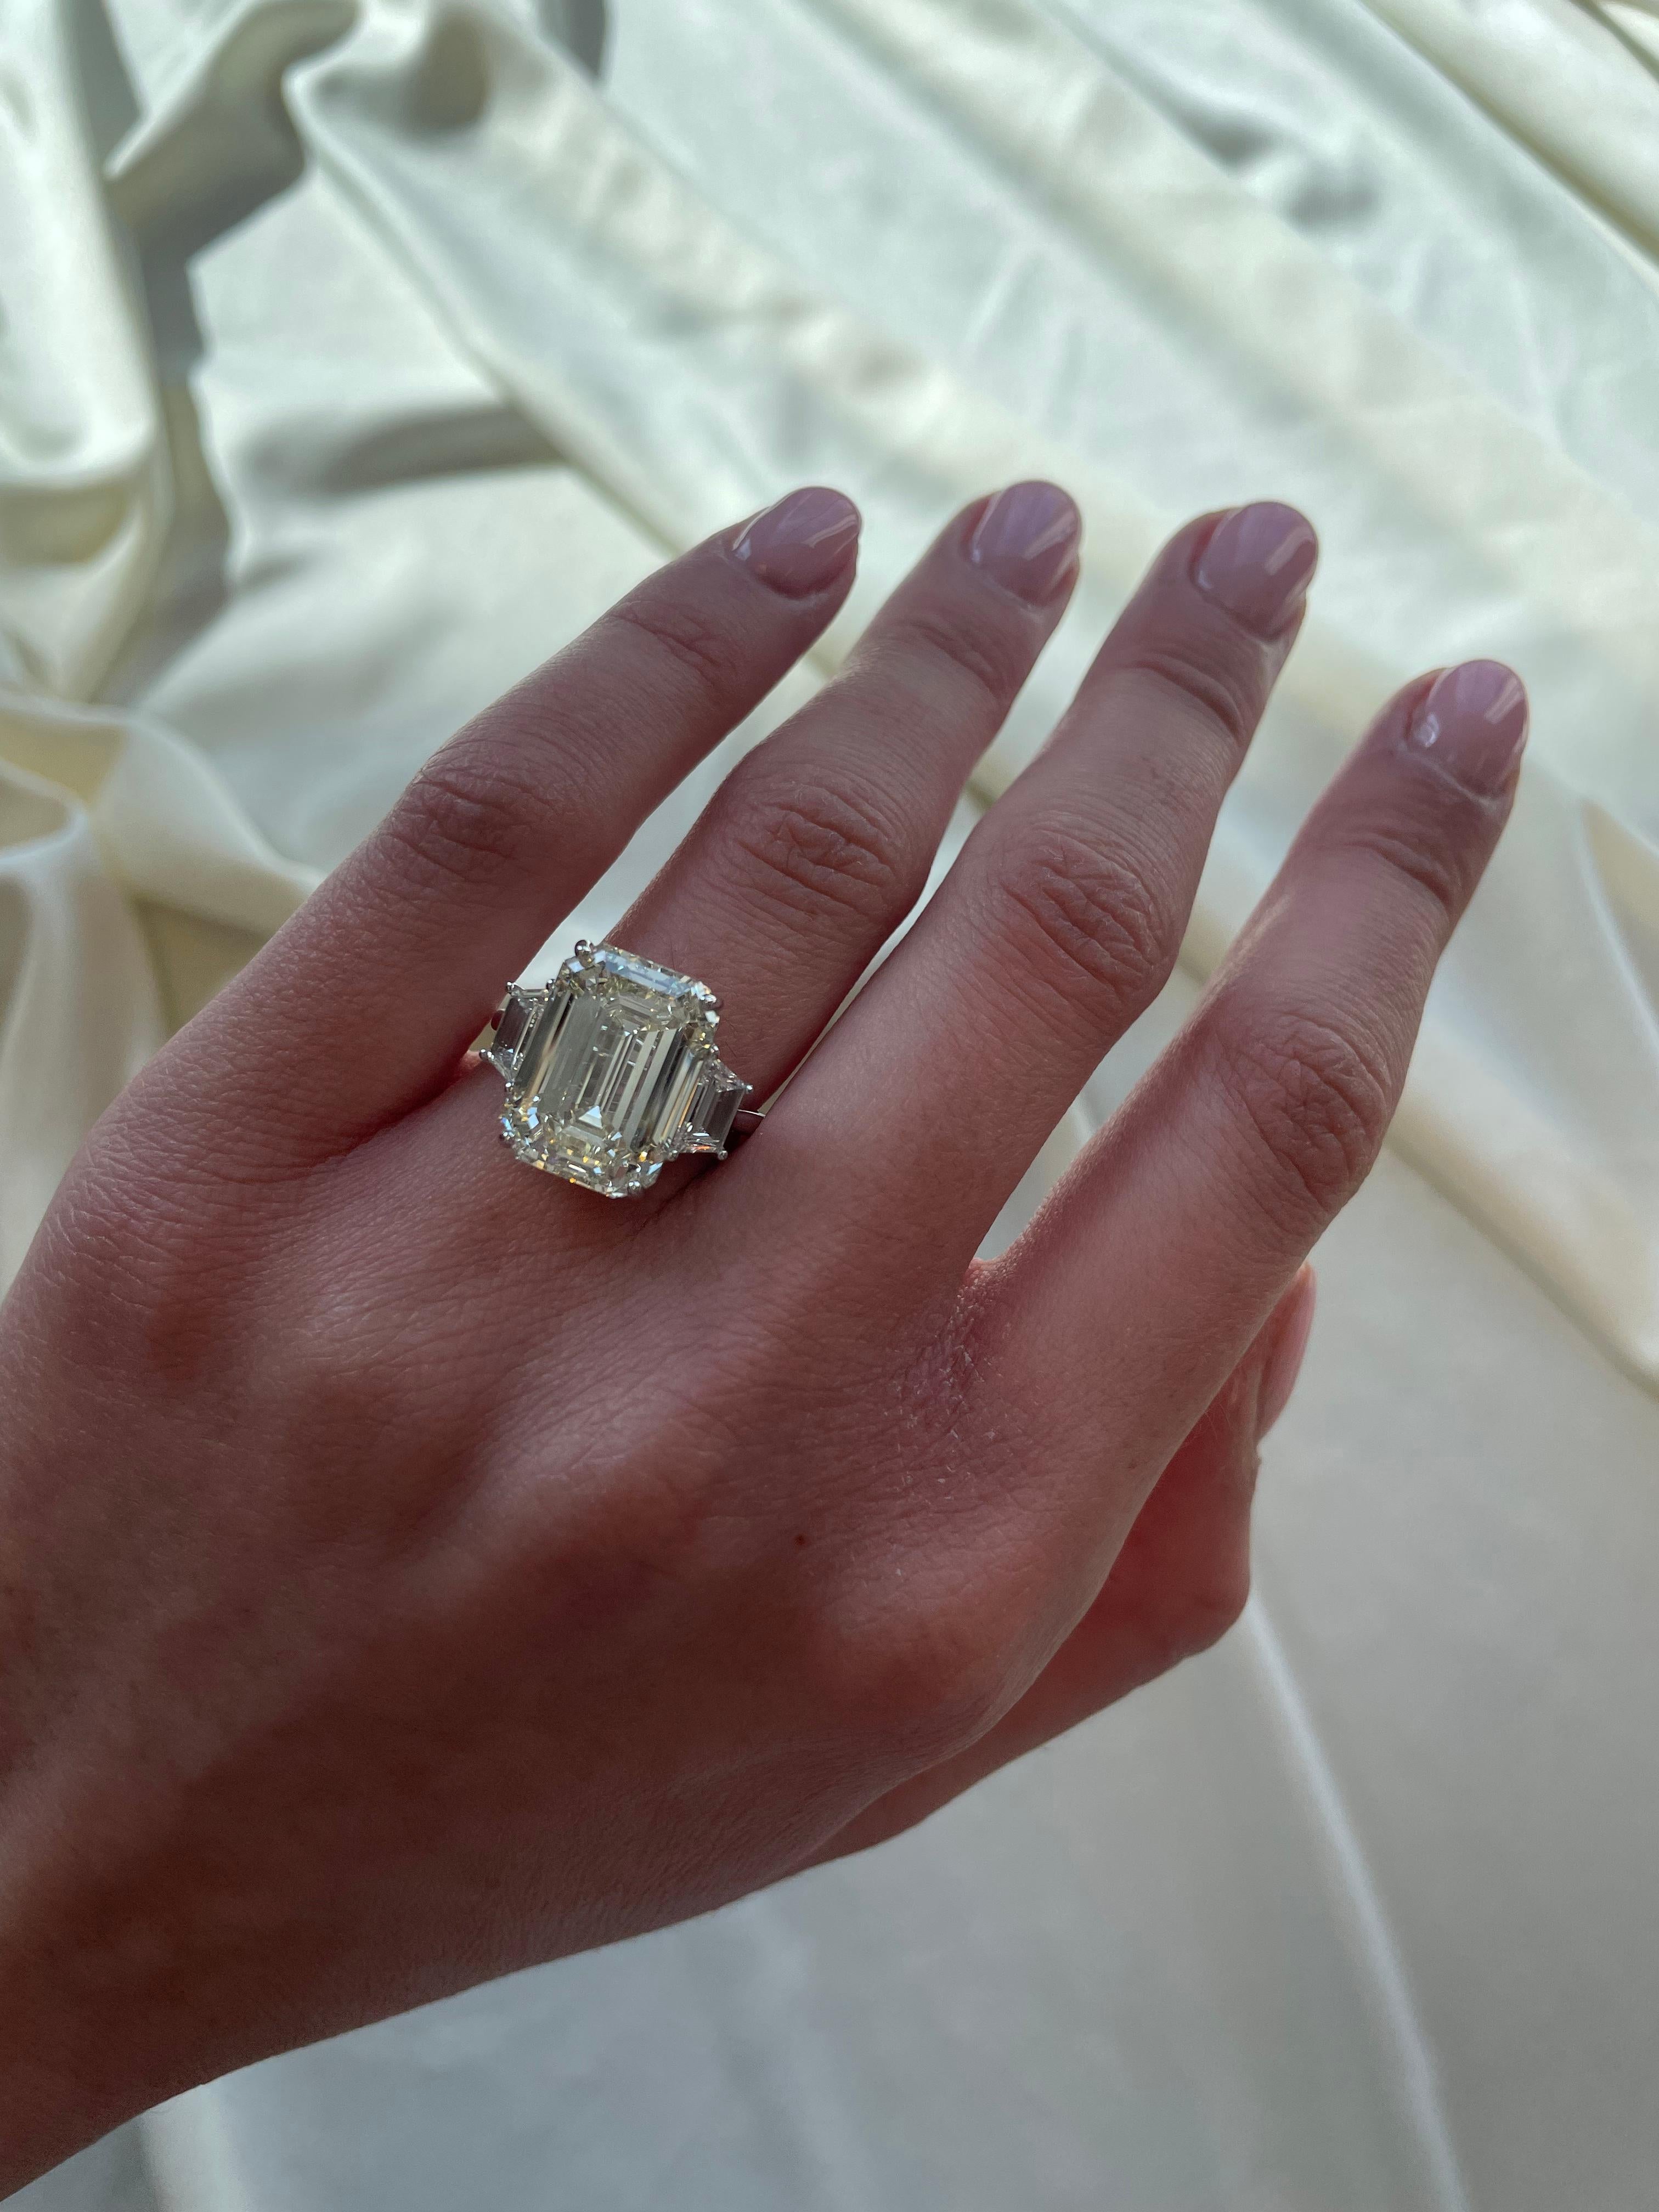 Important modern diamond three-stone engagement ring, GIA certified. High jewelry by Alexander Beverly Hills.
10.90 carats total diamond weight.
10.06 carat emerald cut diamond, GIA certified. M color grade and VVS2 clarity. Complimented by 2